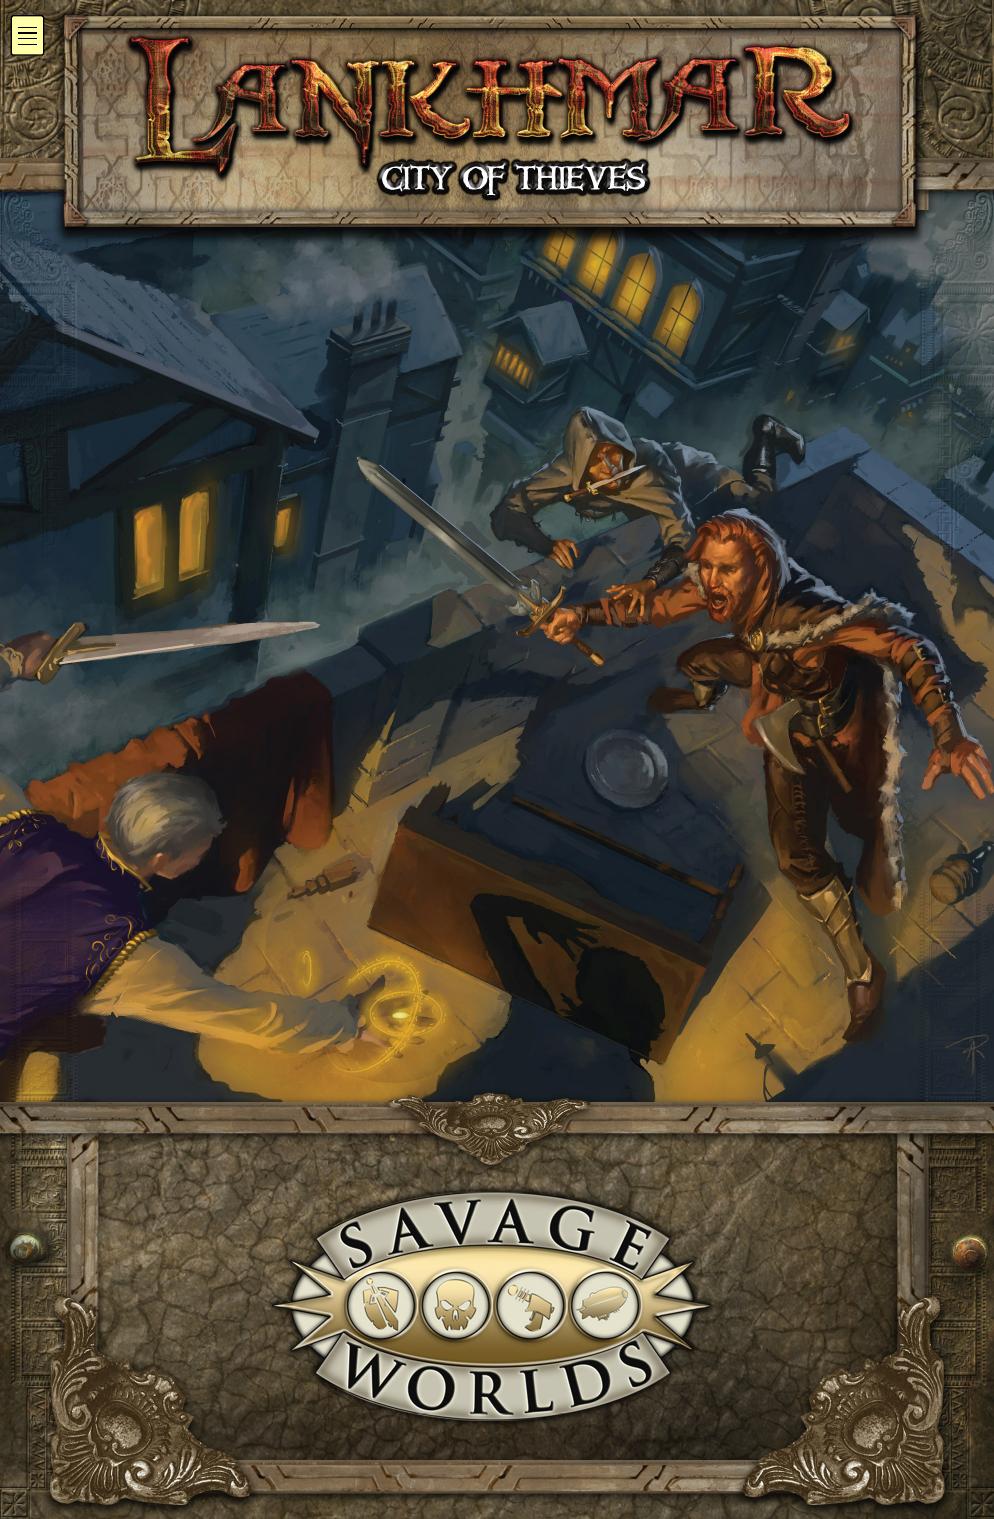 Lankhmar, City of Thieves